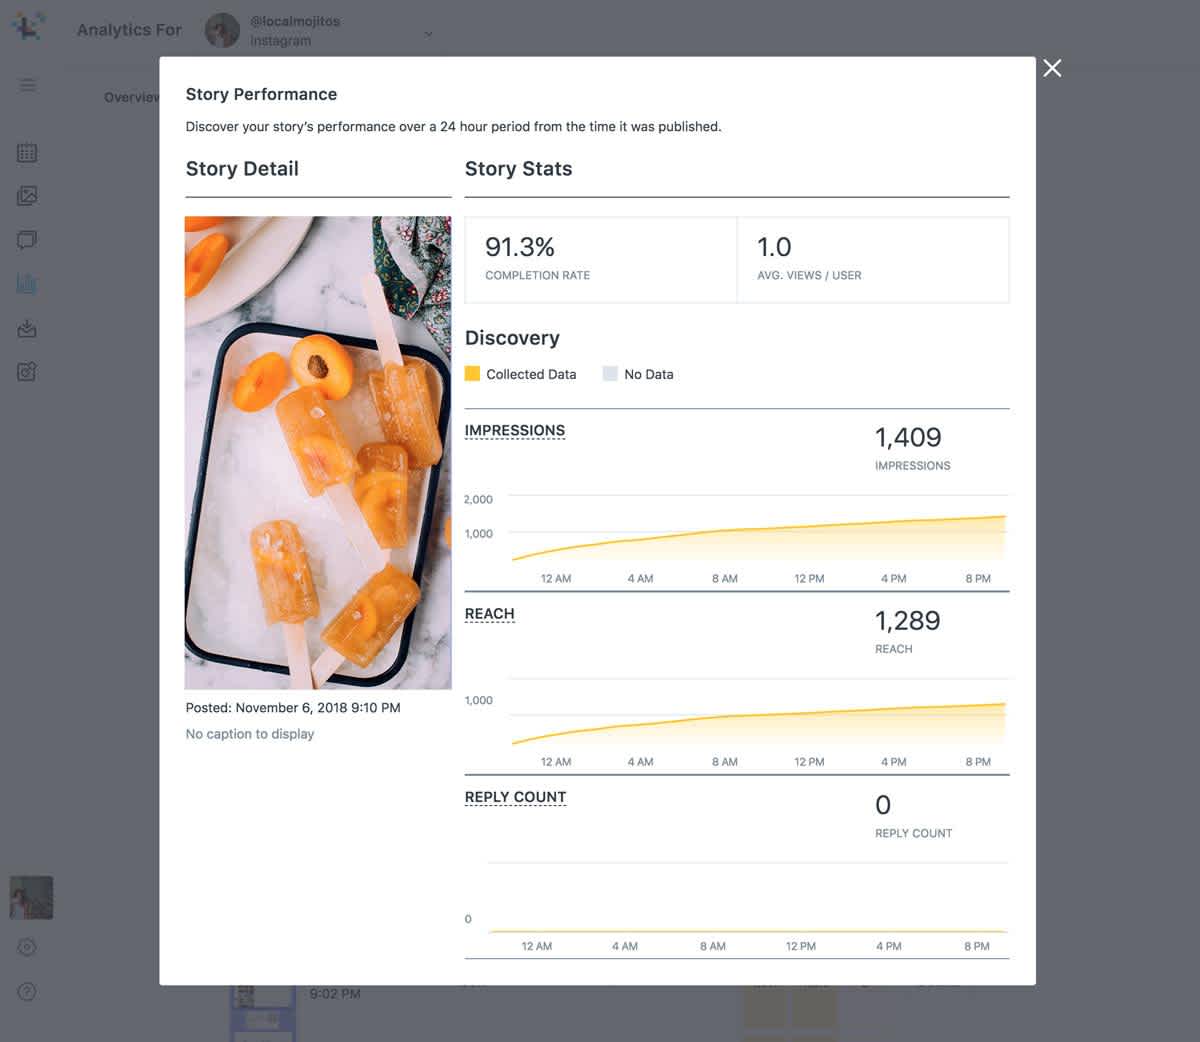 Difference Between Reach & Impressions in Instagram Stories Analytics